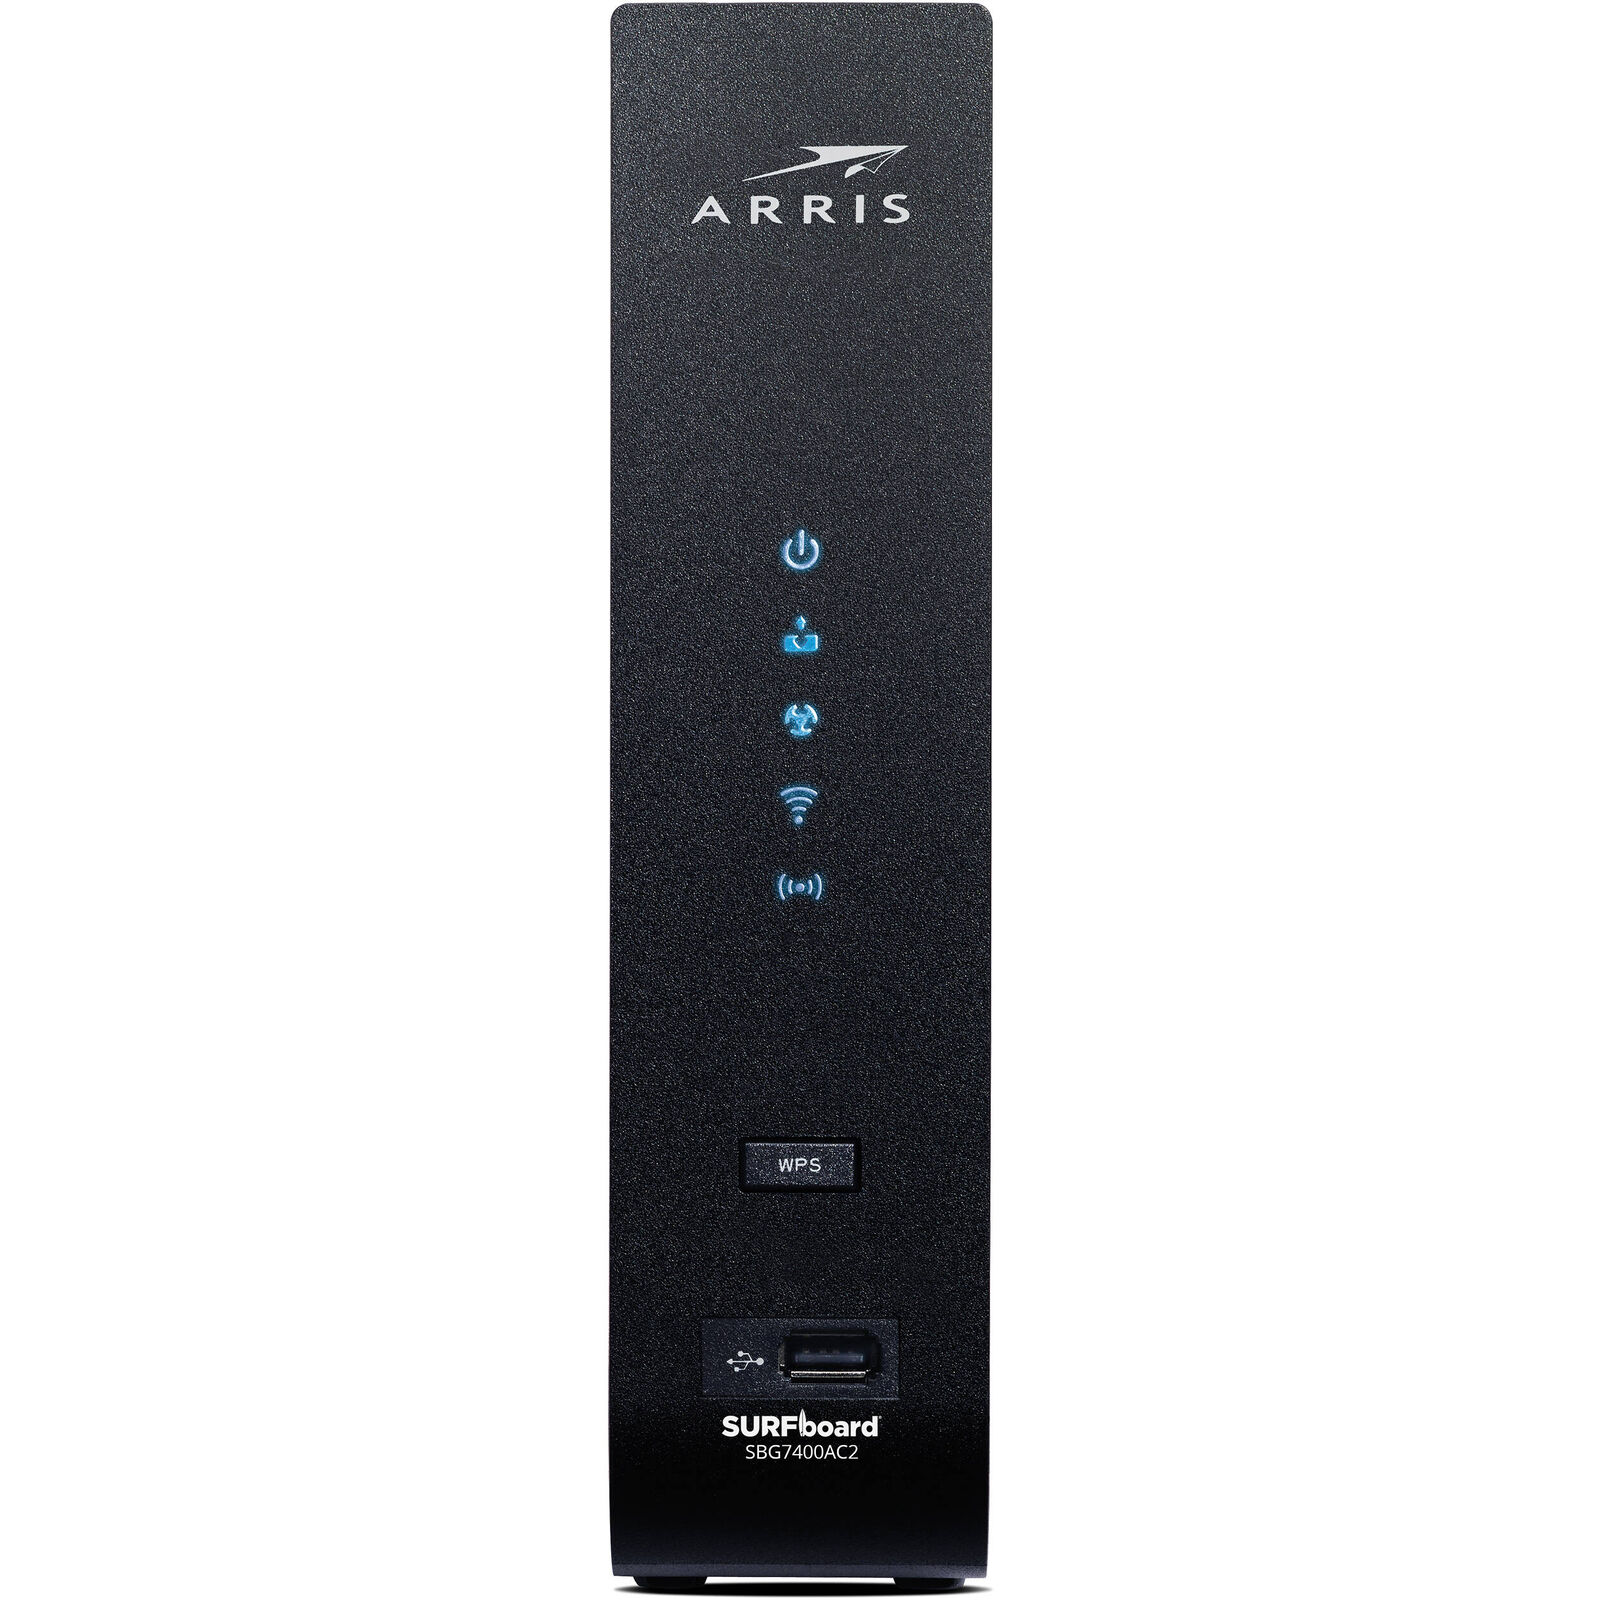 ARRIS SURFboard SBG7400AC2-RB DOCSIS 3 Cable Modem Router Certified Refurbished